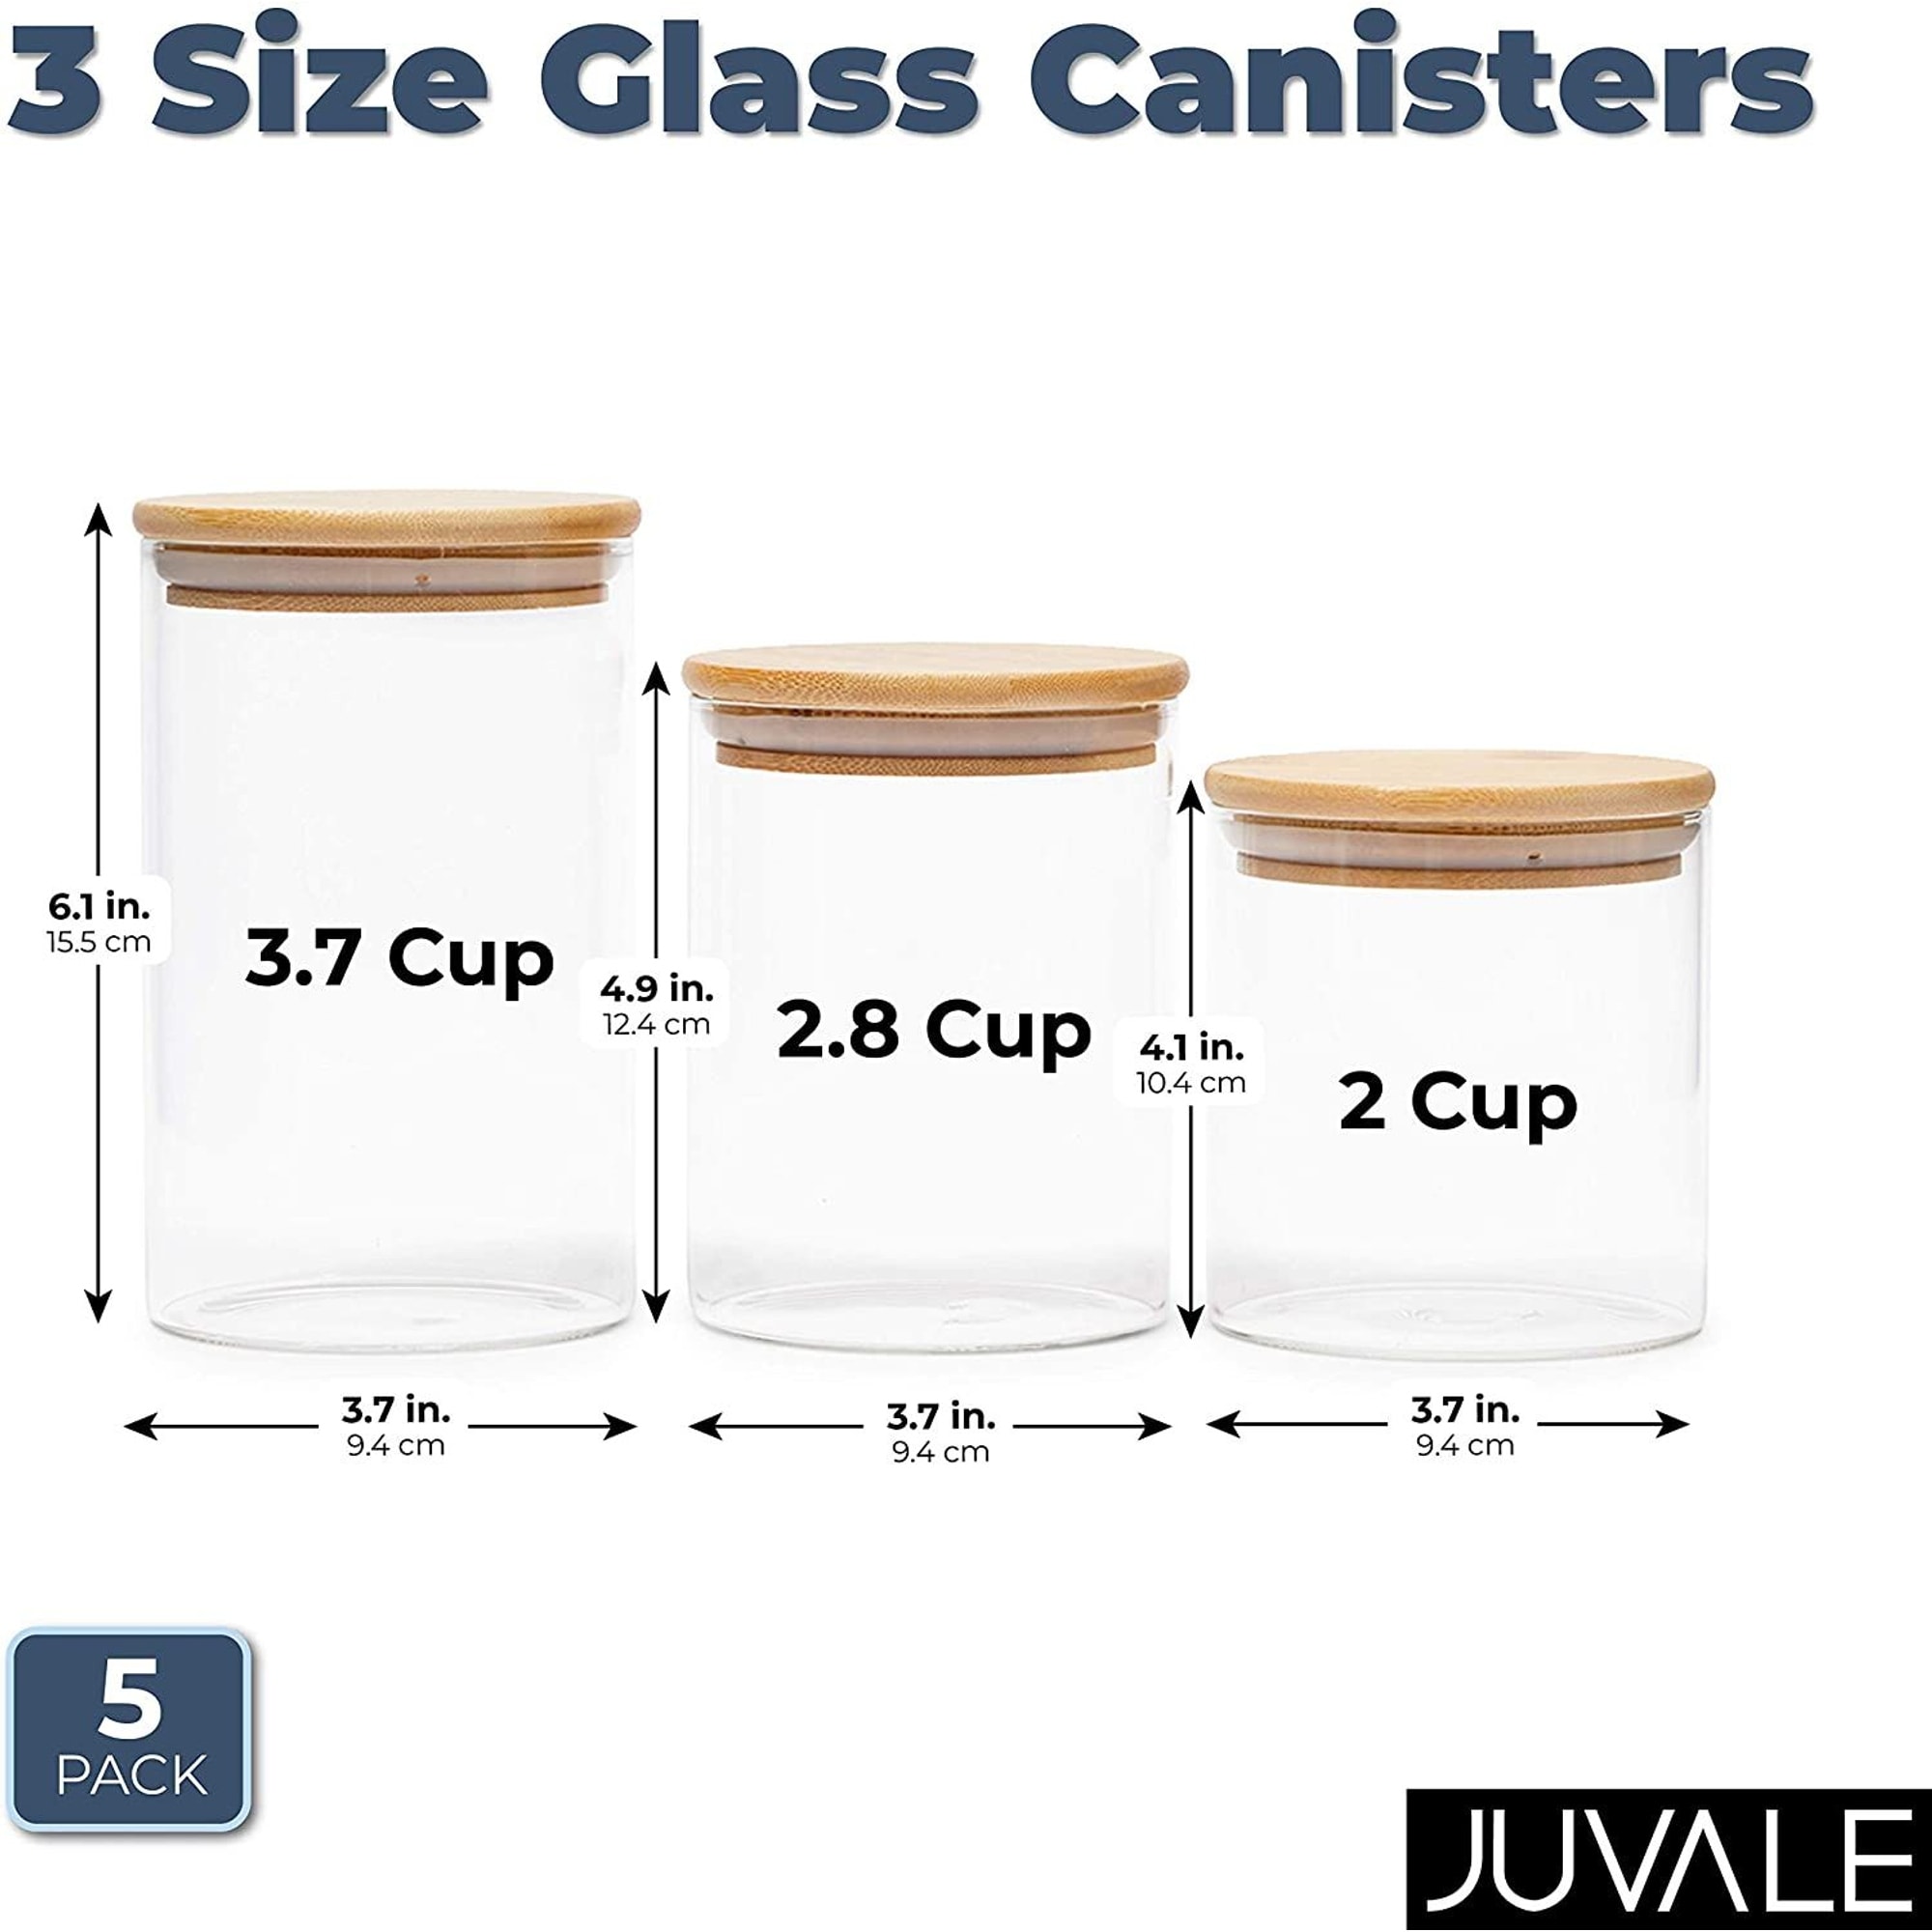 https://ak1.ostkcdn.com/images/products/is/images/direct/9827bcf6f7f08376a10843dffbd139d34e615664/Glass-Canisters-with-Airtight-Bamboo-Lids%2C-3-Sizes-for-Pantry-Storage-%285-Pack%29.jpg